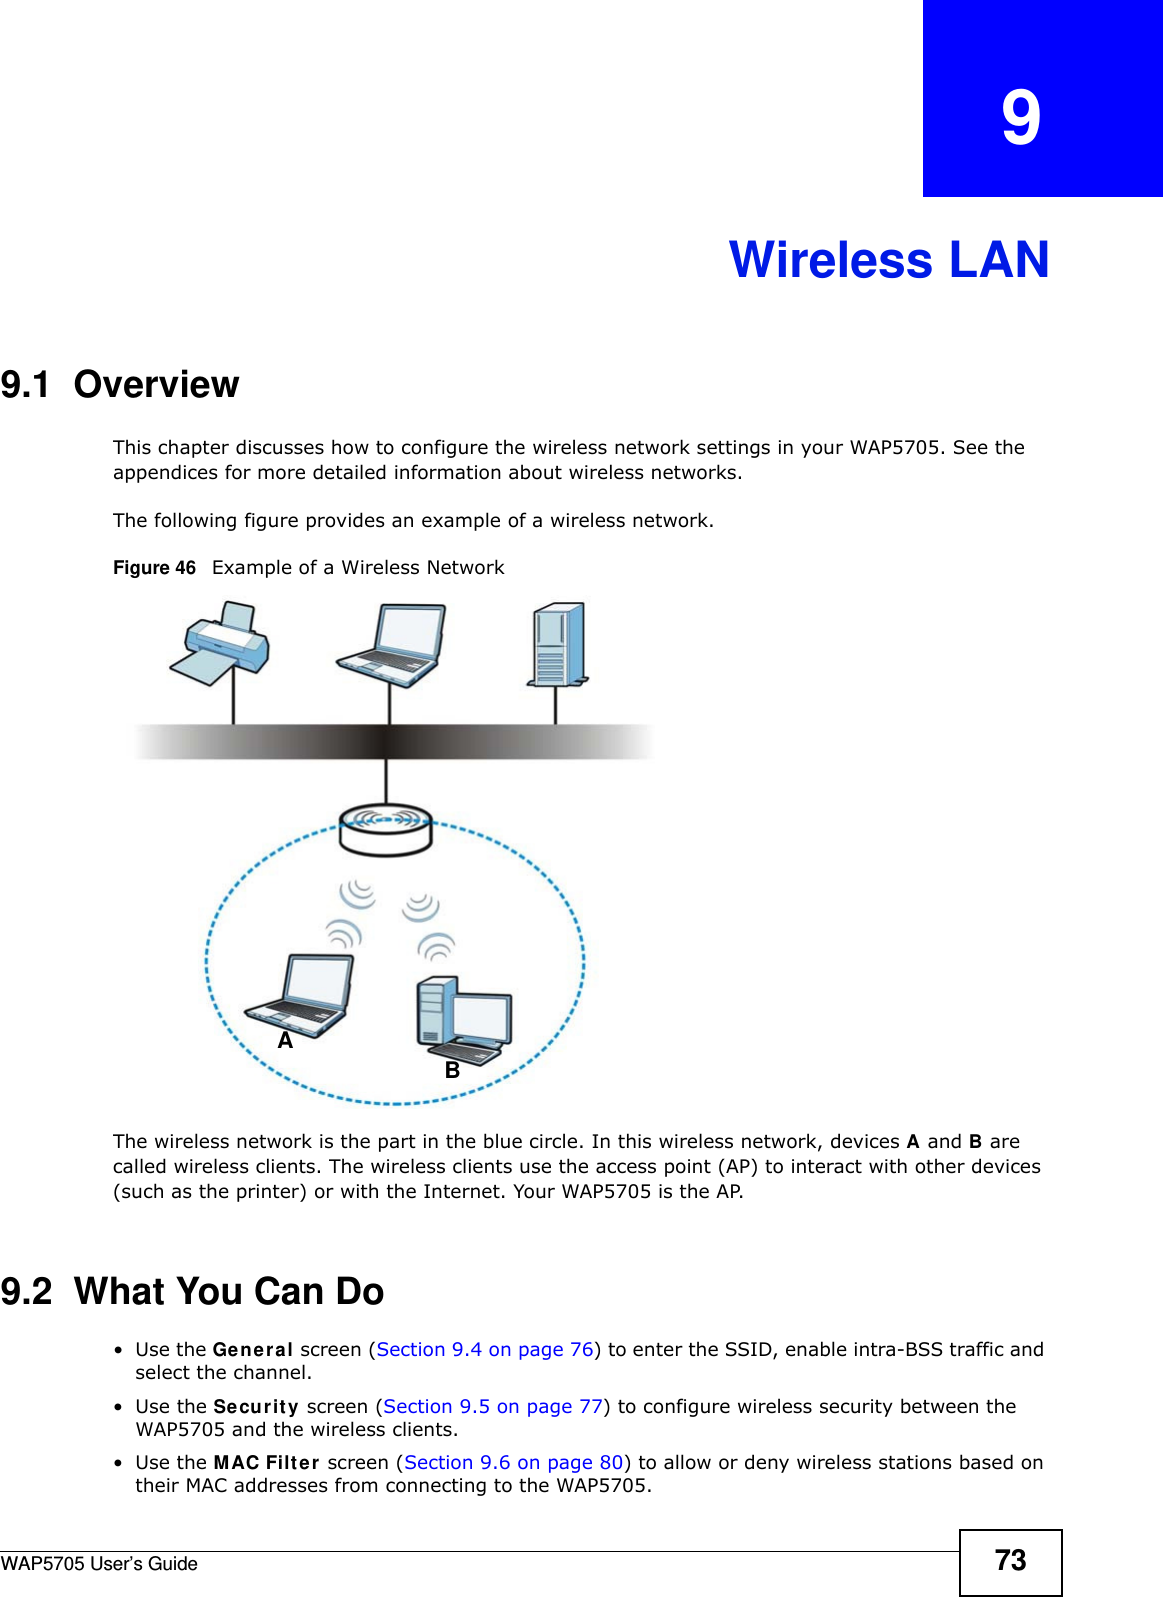 WAP5705 User’s Guide 73CHAPTER   9Wireless LAN9.1  OverviewThis chapter discusses how to configure the wireless network settings in your WAP5705. See the appendices for more detailed information about wireless networks.The following figure provides an example of a wireless network.Figure 46   Example of a Wireless NetworkThe wireless network is the part in the blue circle. In this wireless network, devices A and B are called wireless clients. The wireless clients use the access point (AP) to interact with other devices (such as the printer) or with the Internet. Your WAP5705 is the AP.9.2  What You Can Do•Use the Gen e ral screen (Section 9.4 on page 76) to enter the SSID, enable intra-BSS traffic and select the channel.•Use the Securit y screen (Section 9.5 on page 77) to configure wireless security between the WAP5705 and the wireless clients.•Use the MAC Filt er screen (Section 9.6 on page 80) to allow or deny wireless stations based on their MAC addresses from connecting to the WAP5705.AB